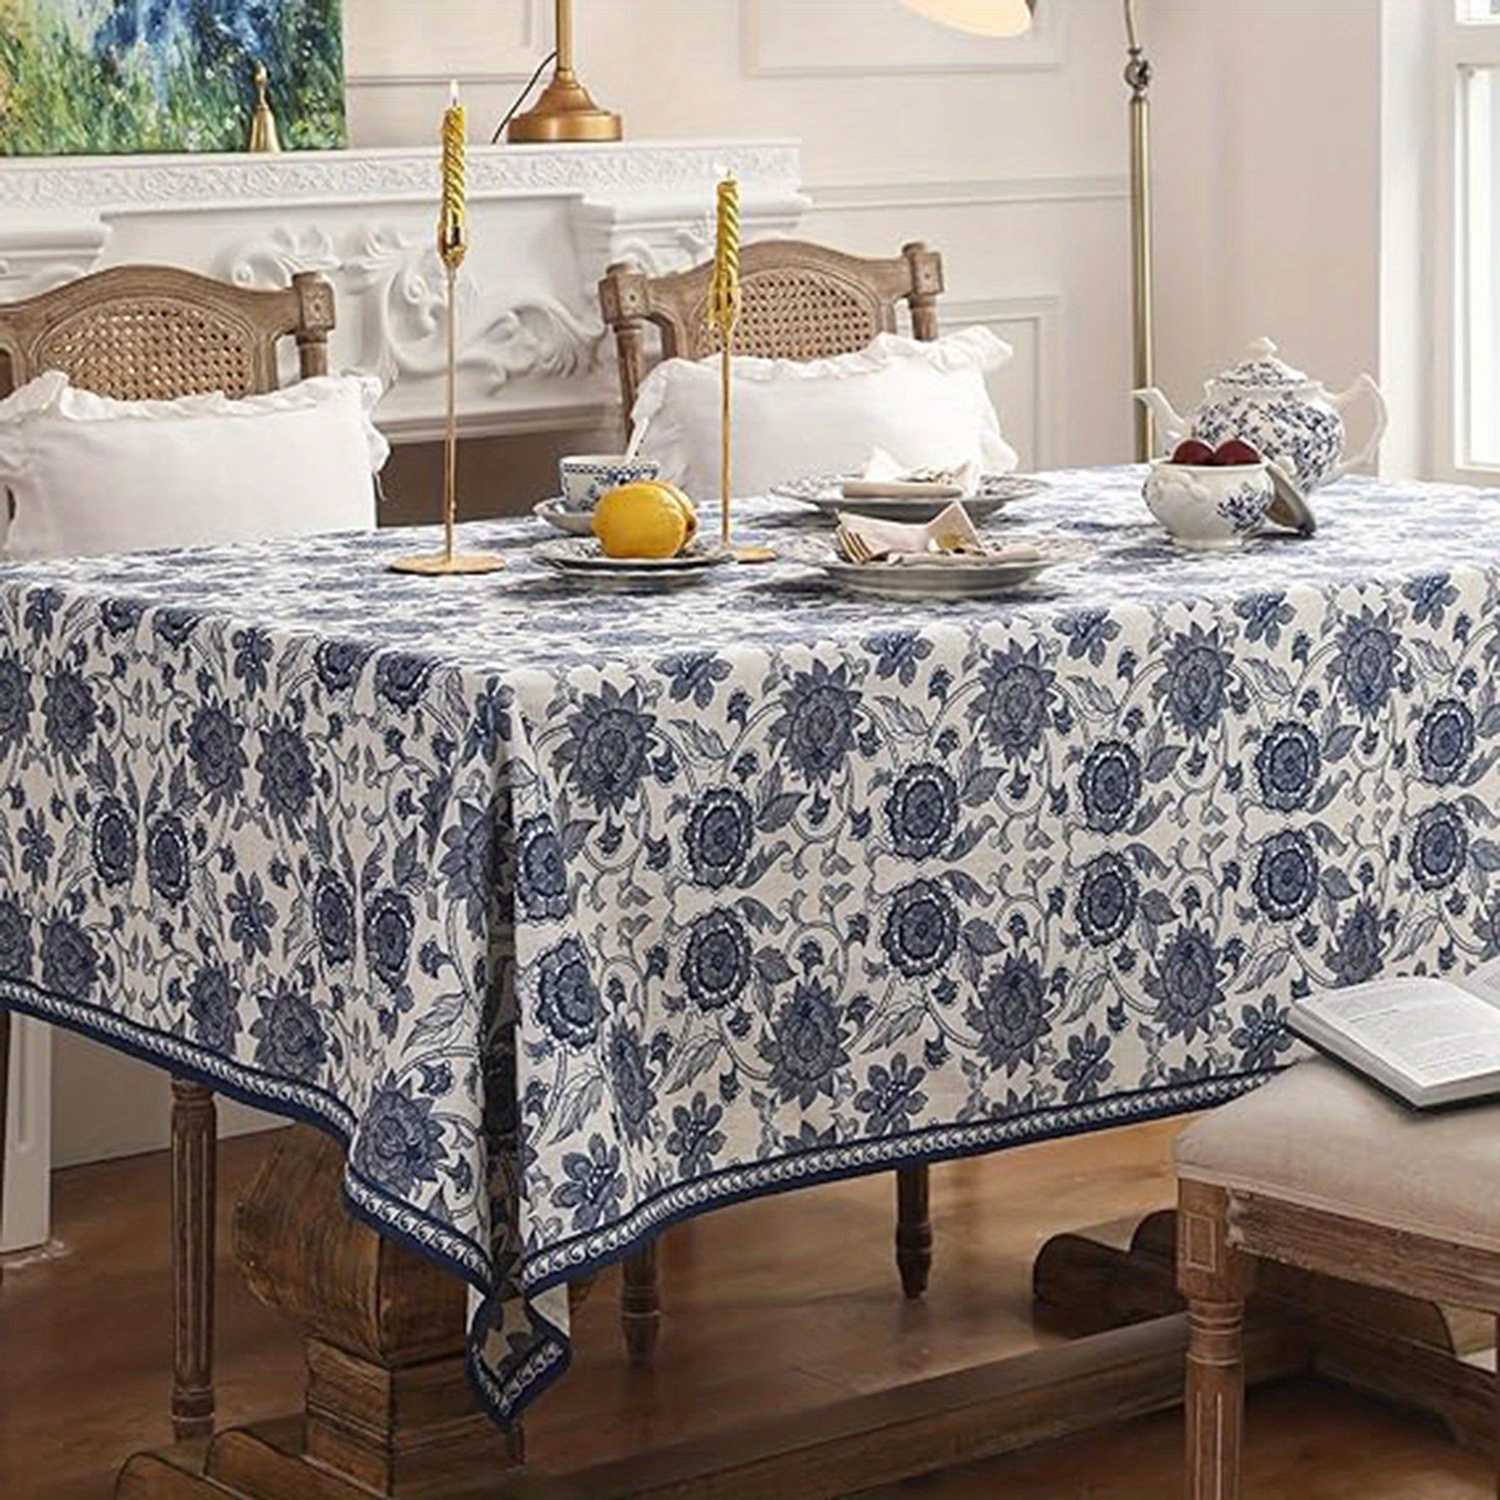 

1pc, Blue Tablecloth For Rectangle Tables, Vintage Elegant Polyester With Paisley Floral Pattern Tablecloths, Farmhouse Flowers Table Cover Cloth Decorative For Kitchen Dining Room